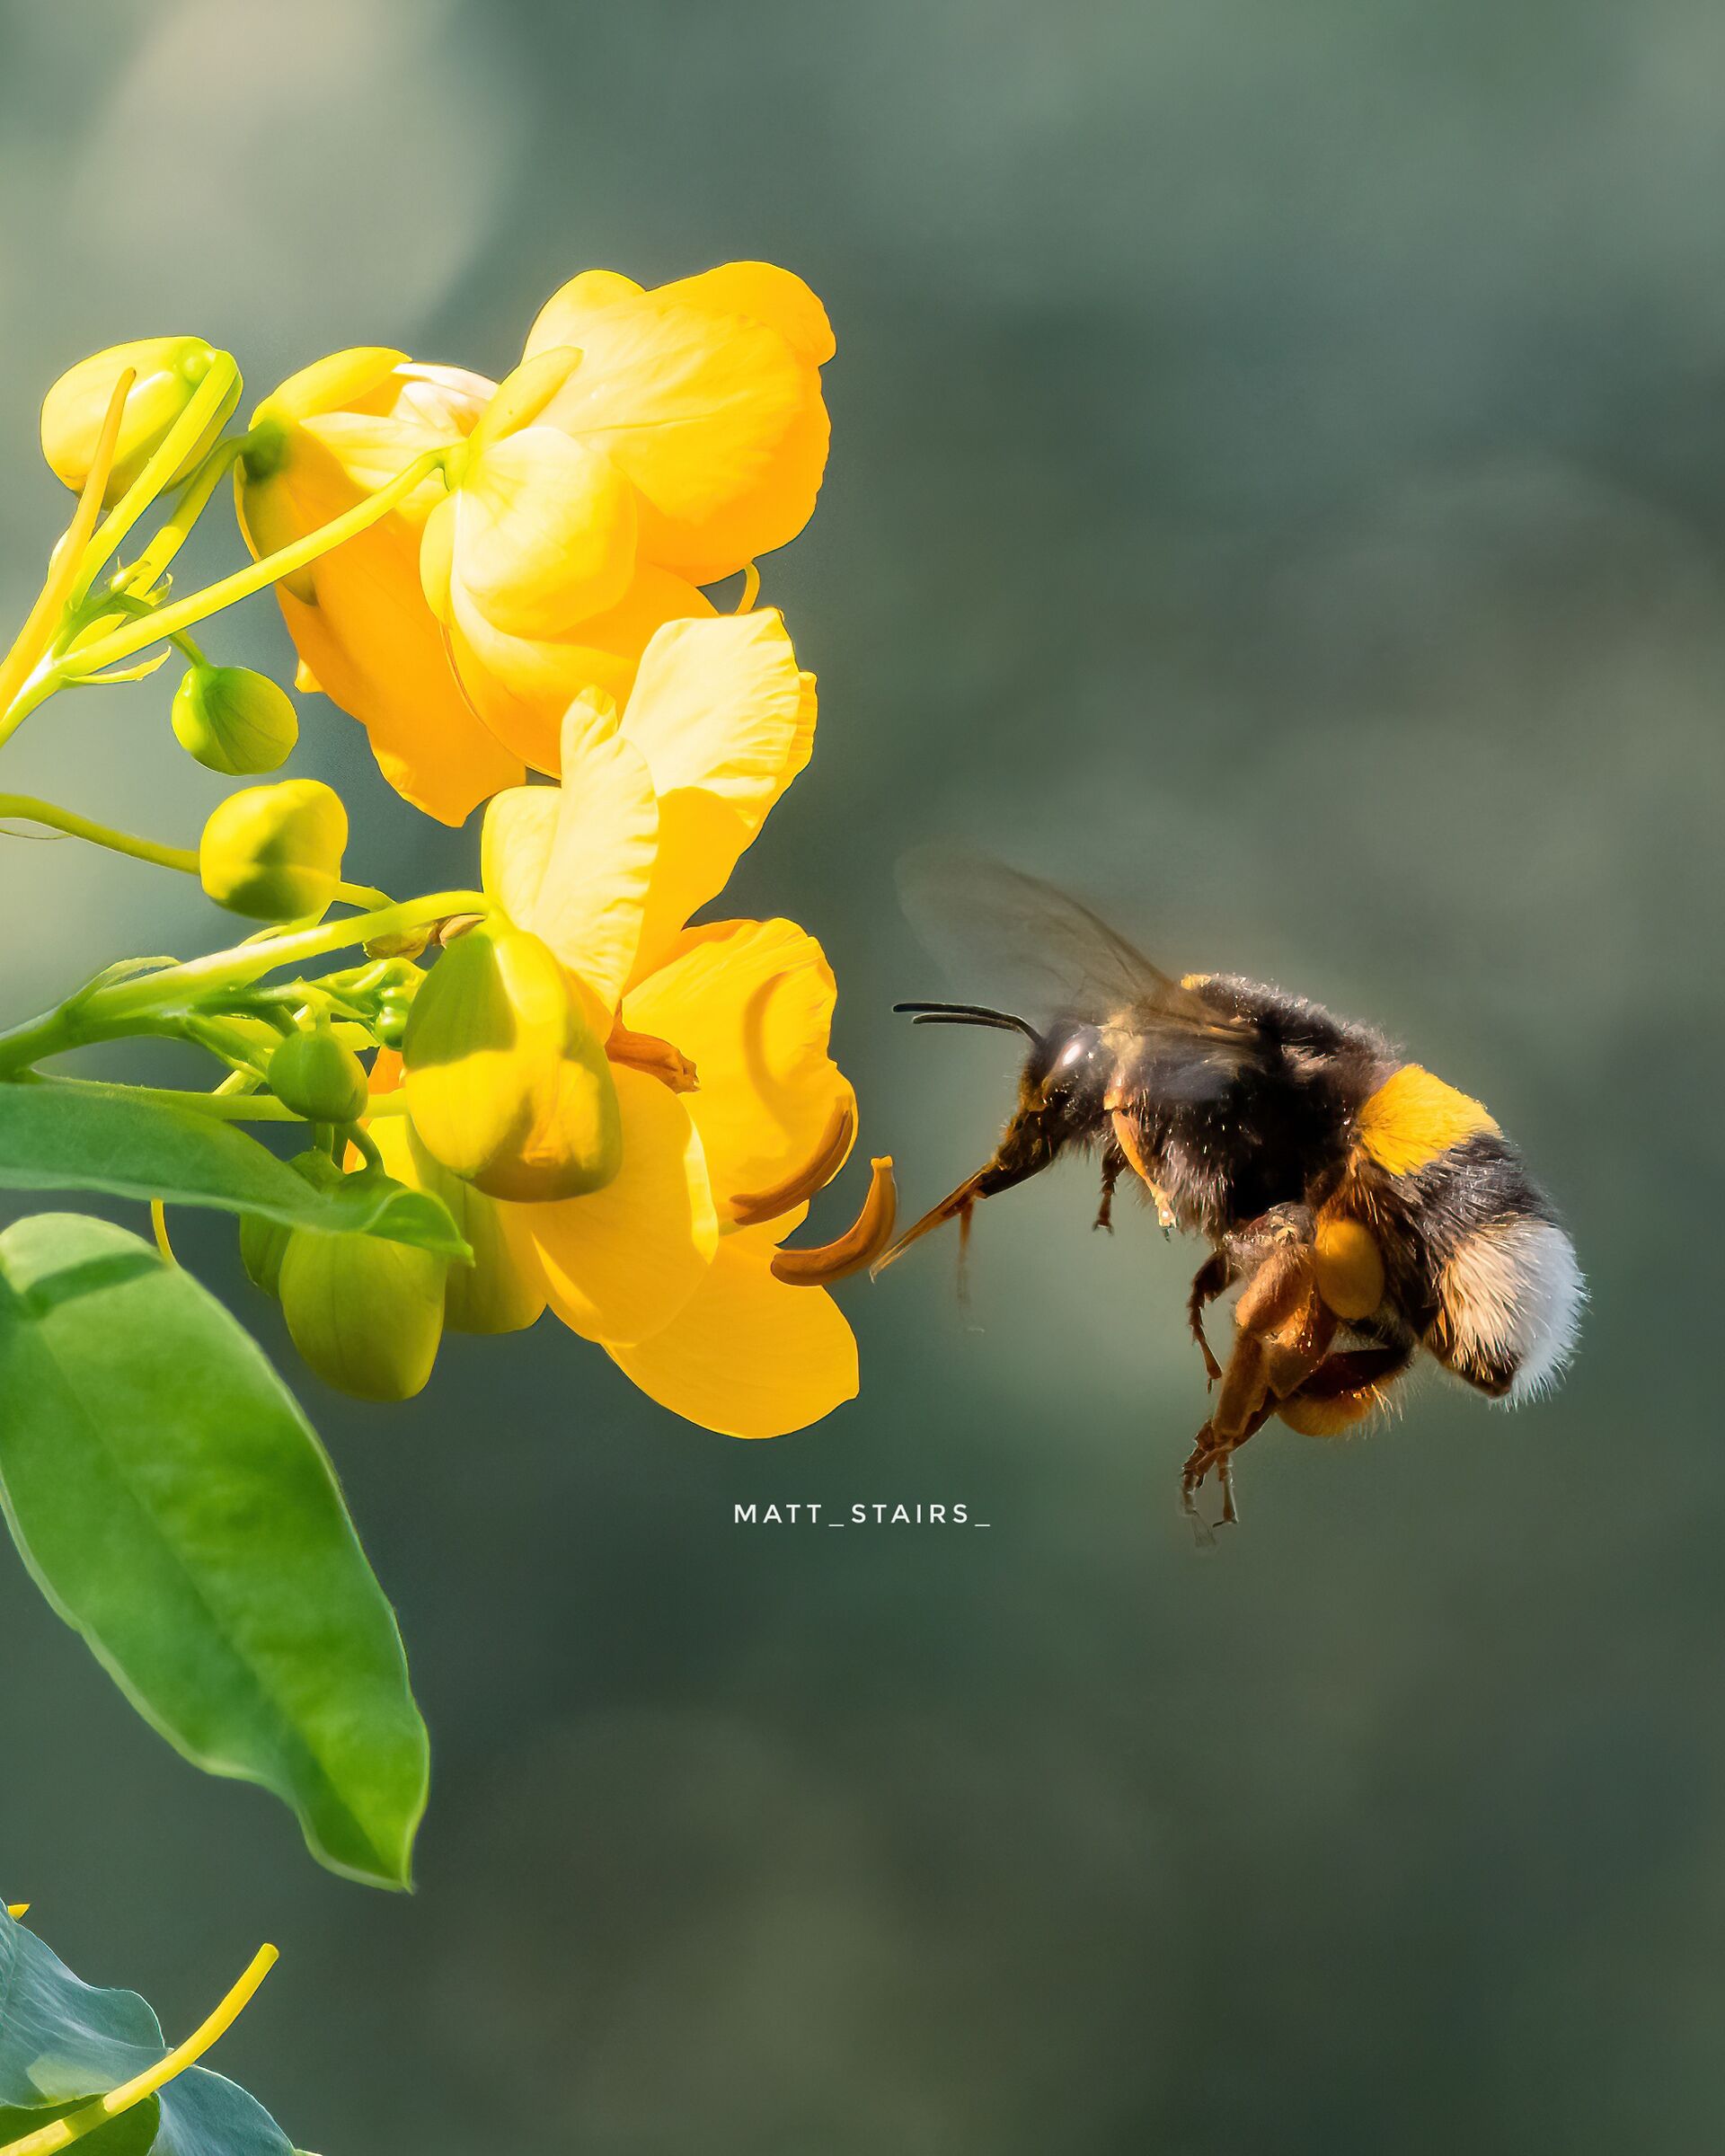 The flight of the bumblebee...